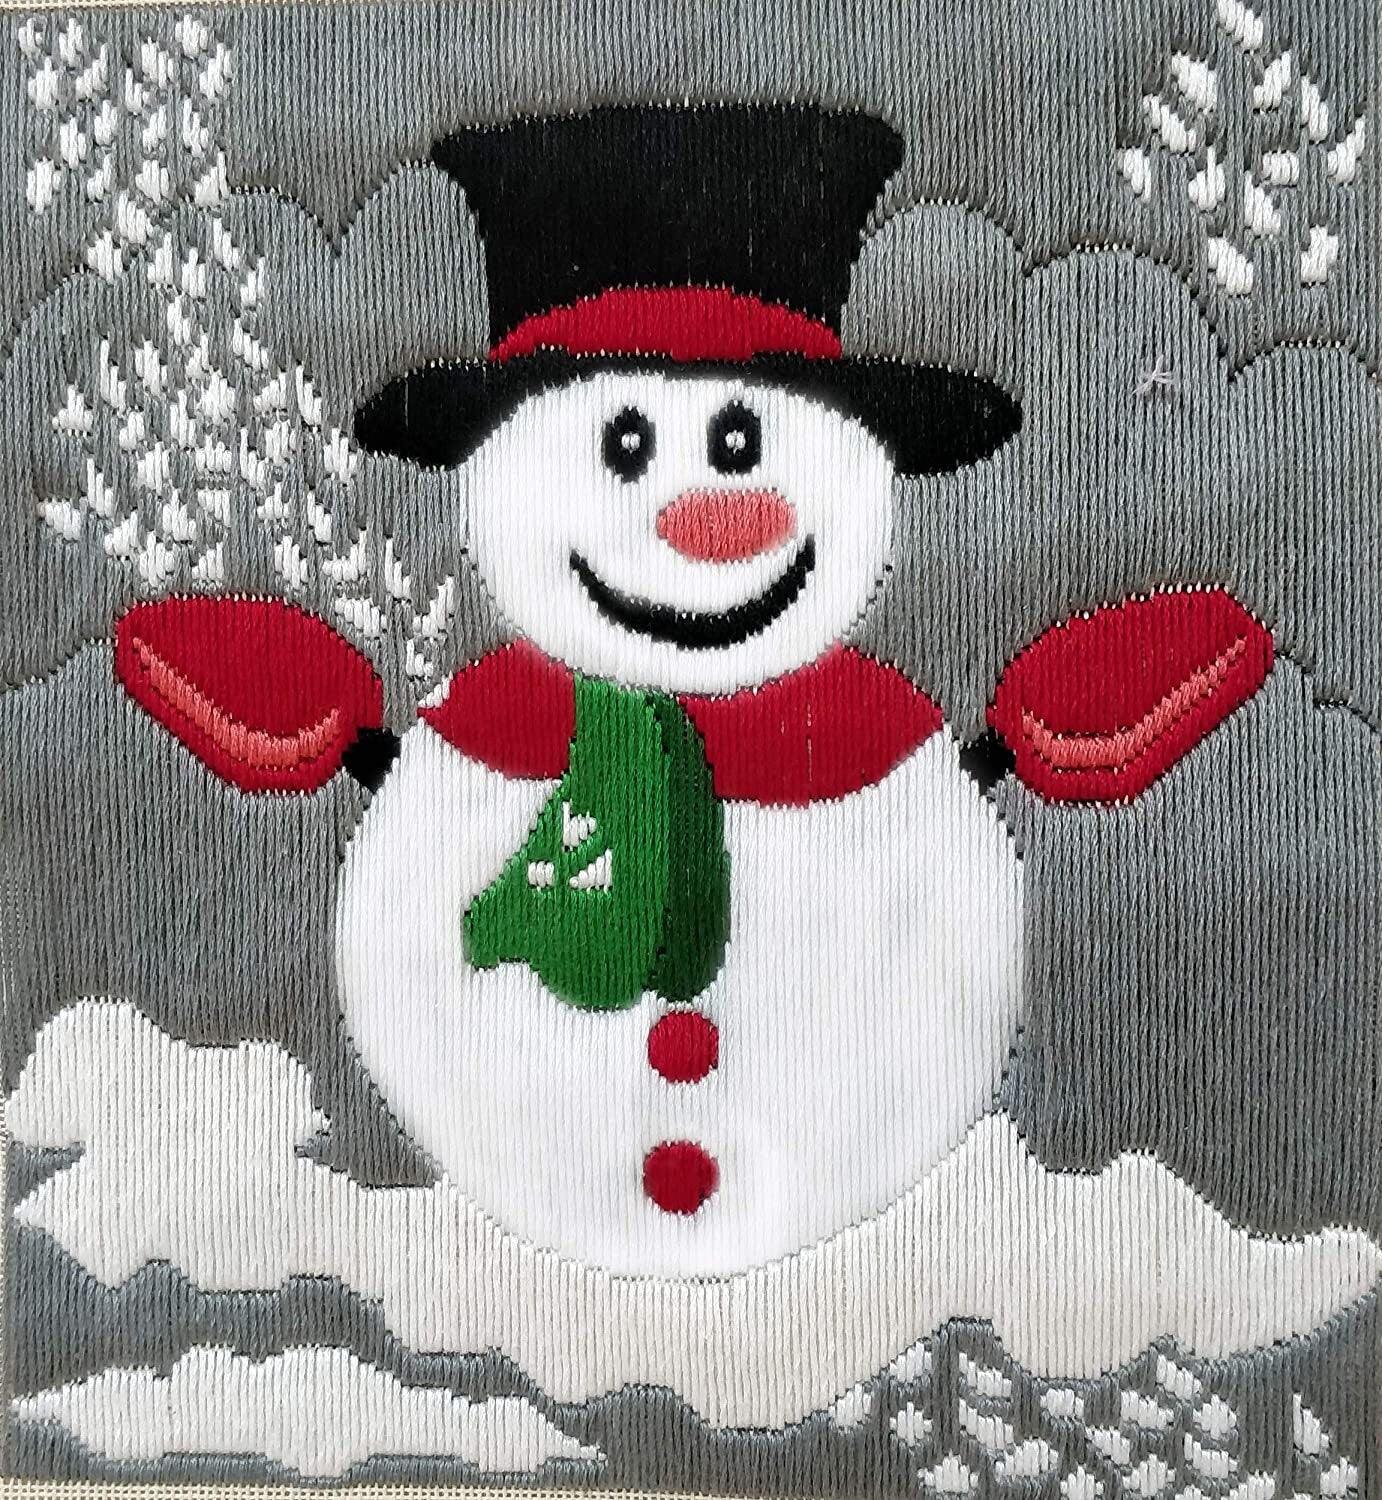 DIY Stitch Kit Christmas Special Embroidery Kits - Santa - Candy - Jingle Bell - Christmas Tree - Snow Man For kids gift purpose, home decor